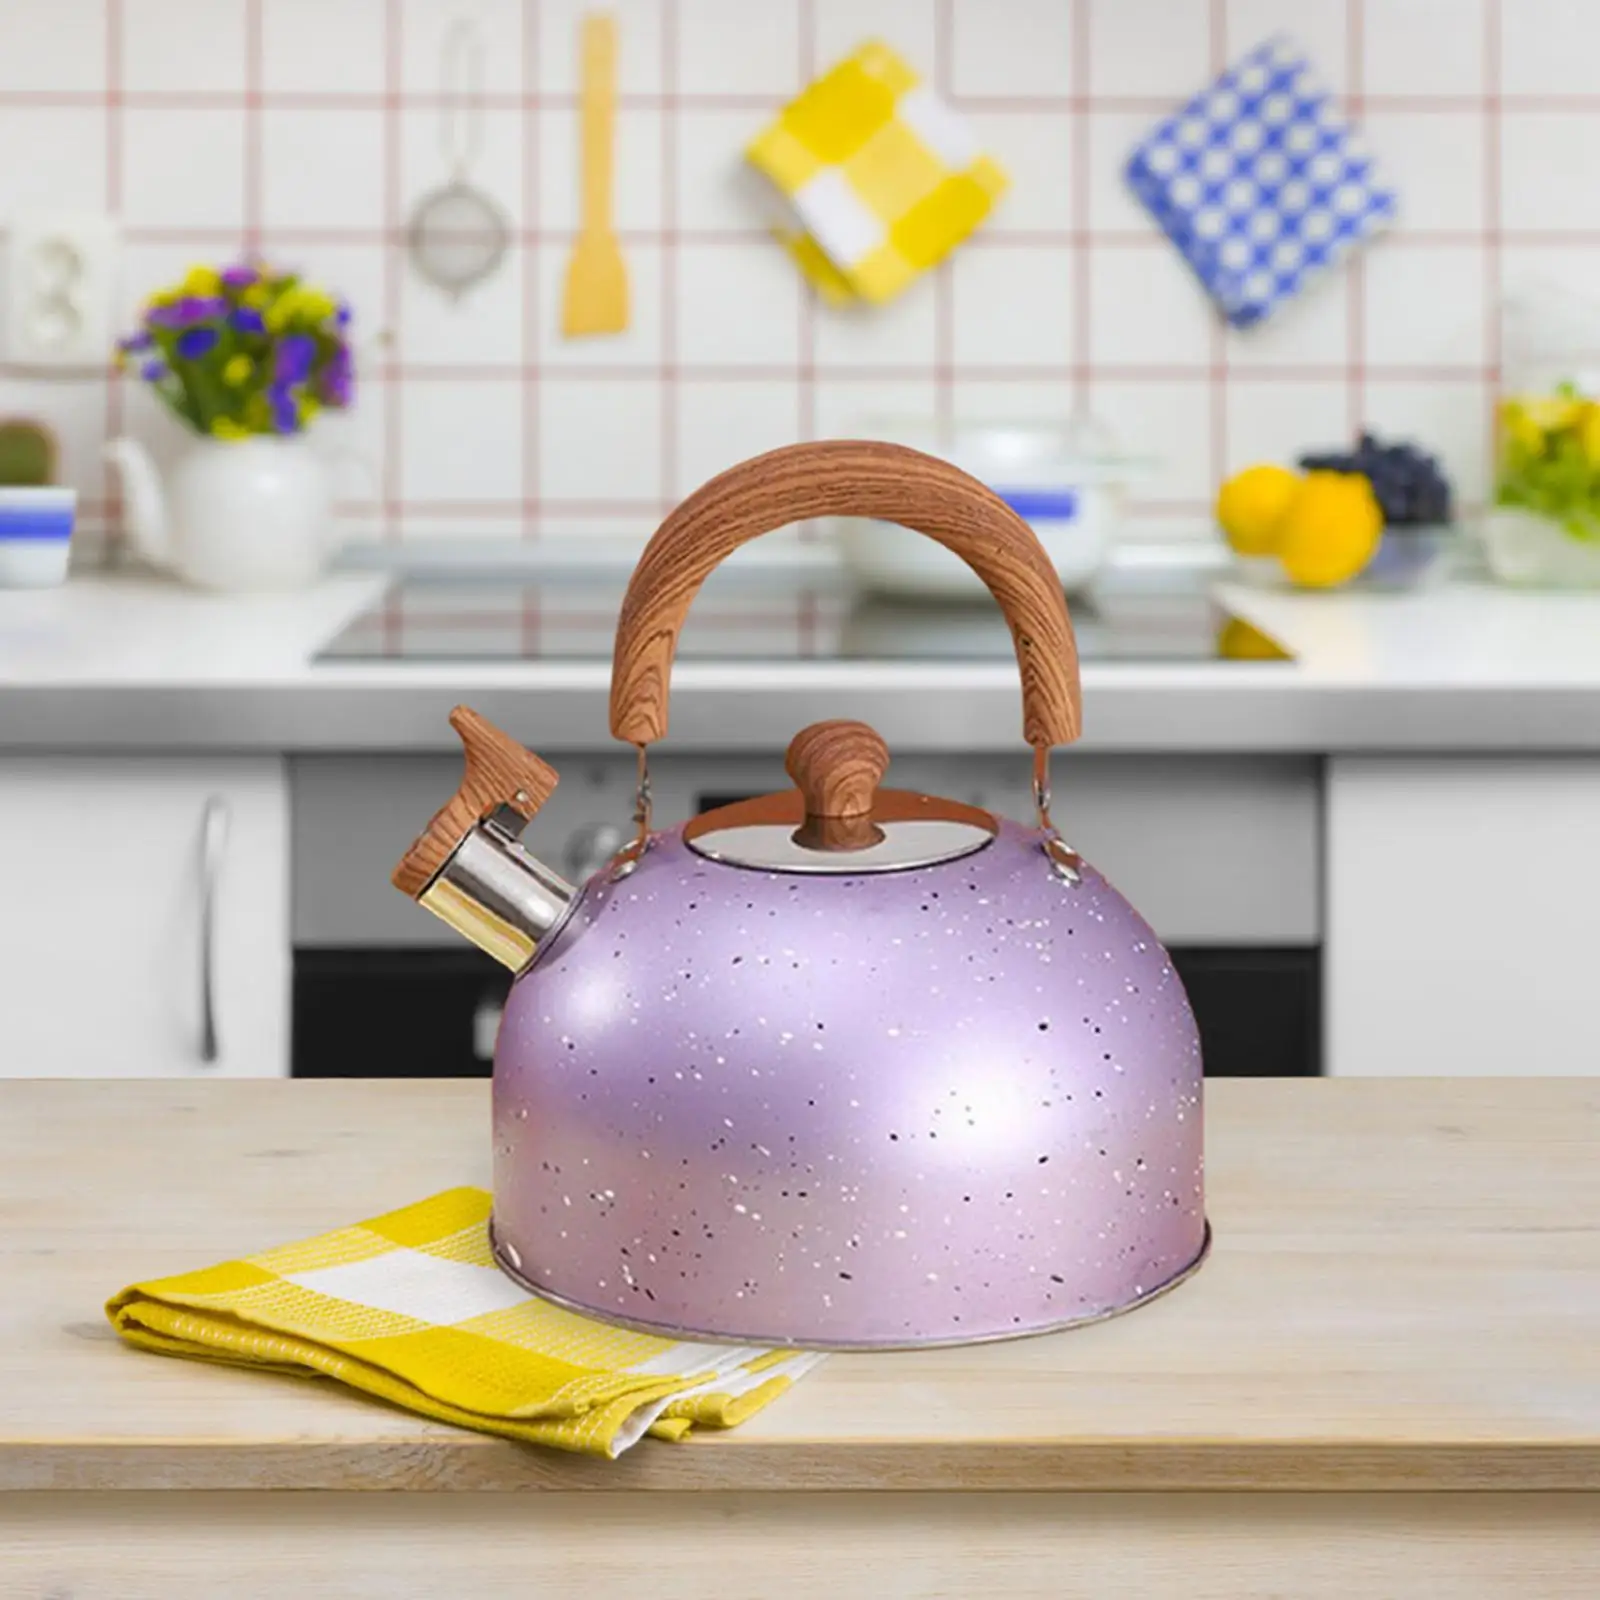 Loud Whistle tea Kettle for Stovetop Fast Boiling Whistle Water Kettle with Wood Handle Tea Pots for Boiling water Milk